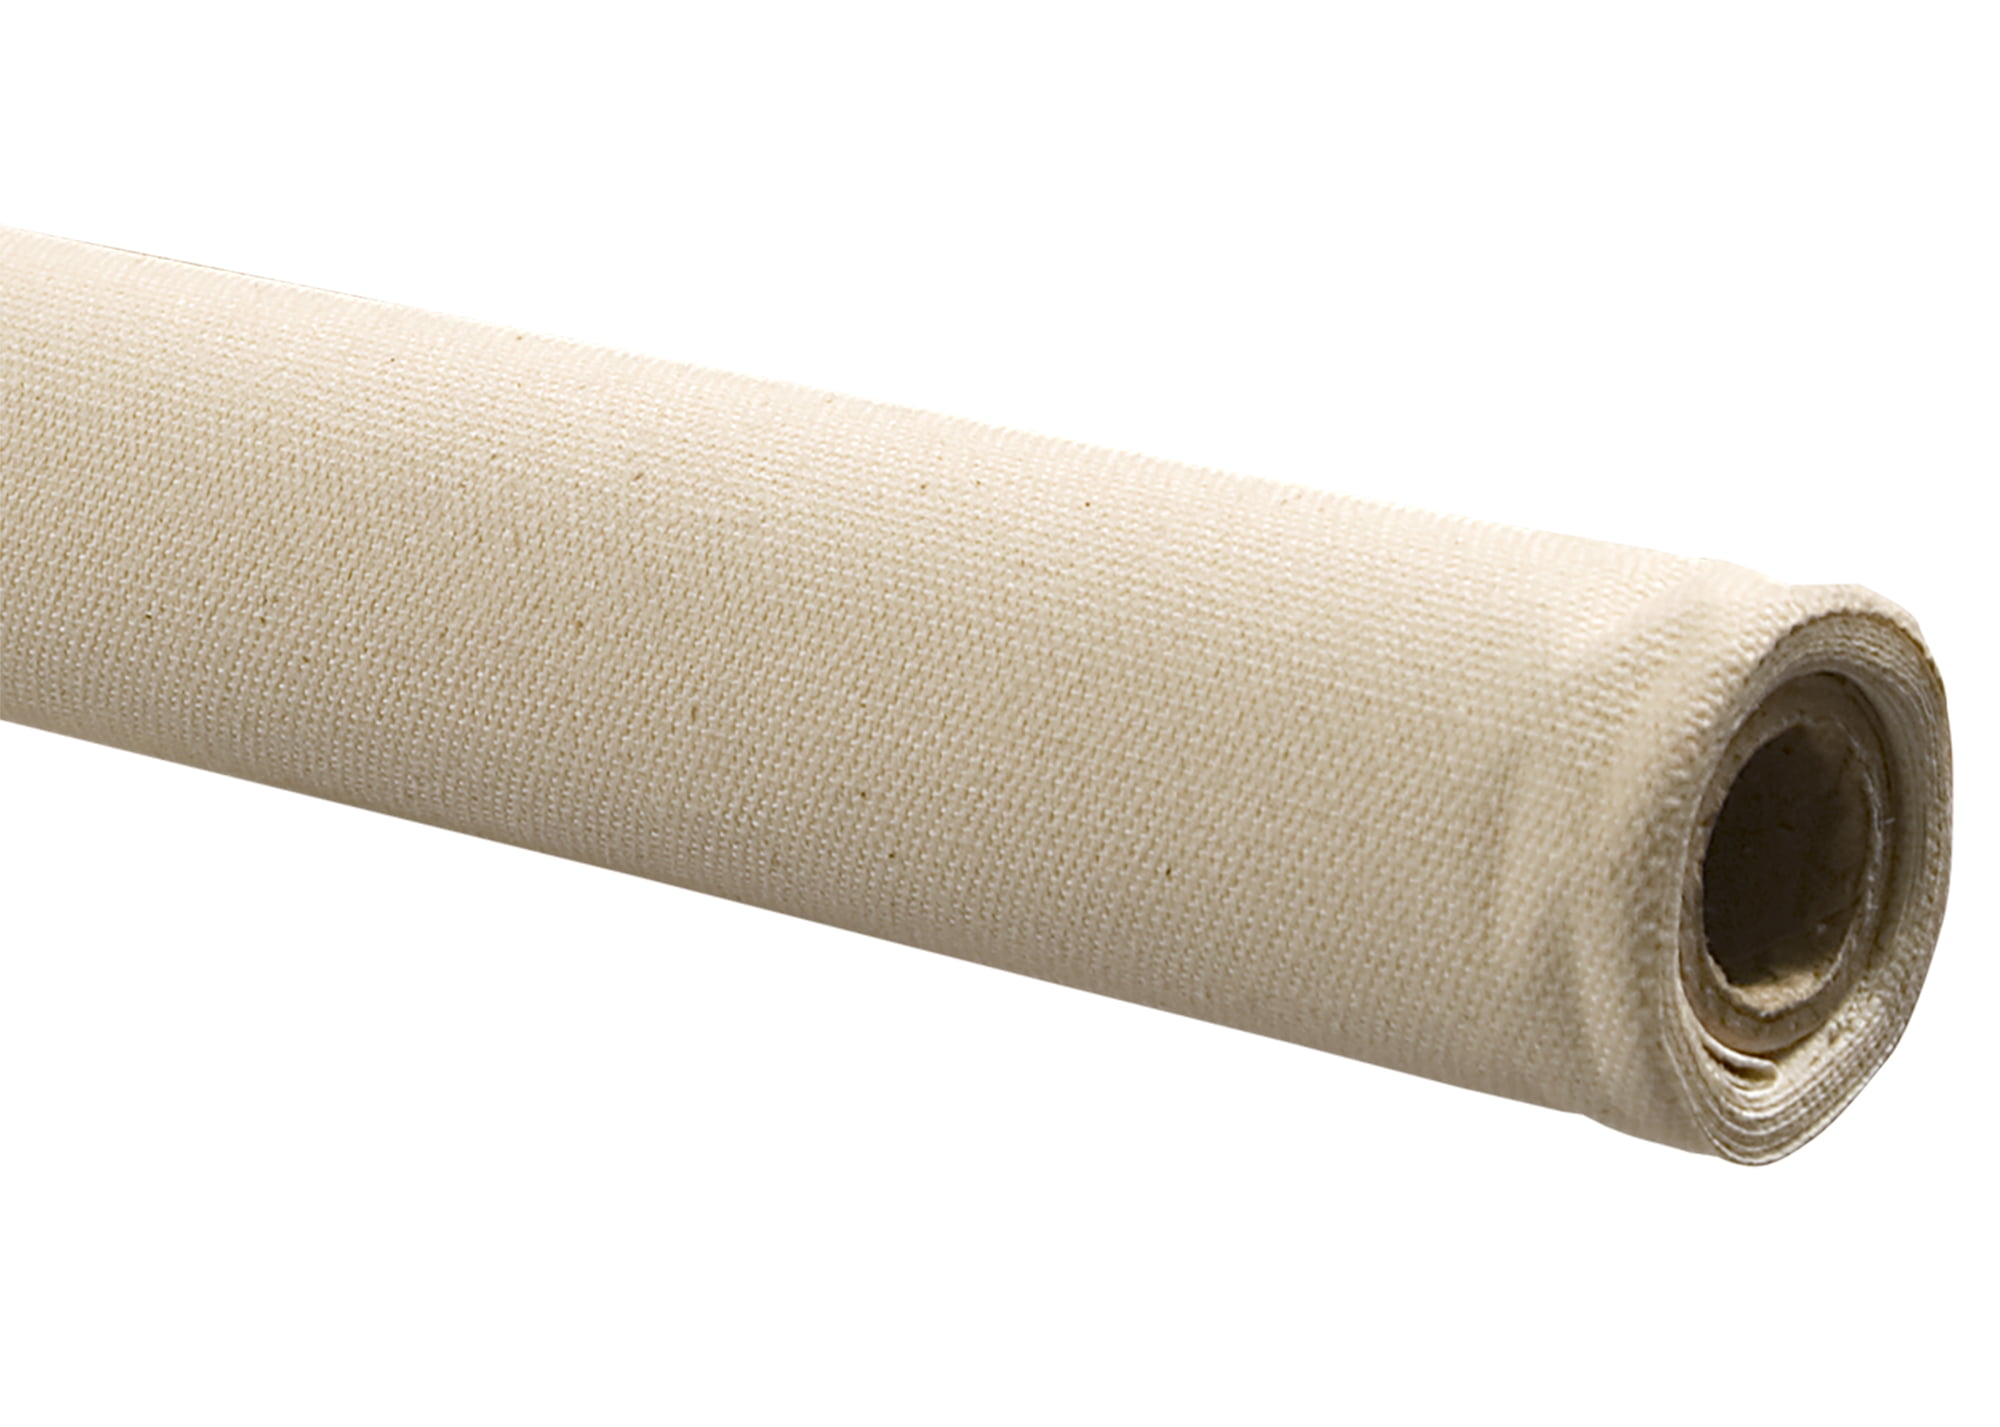 Centurion Artist Linen Canvas Roll for Painting, 11 Ounce Weight,  Universally Primed, 